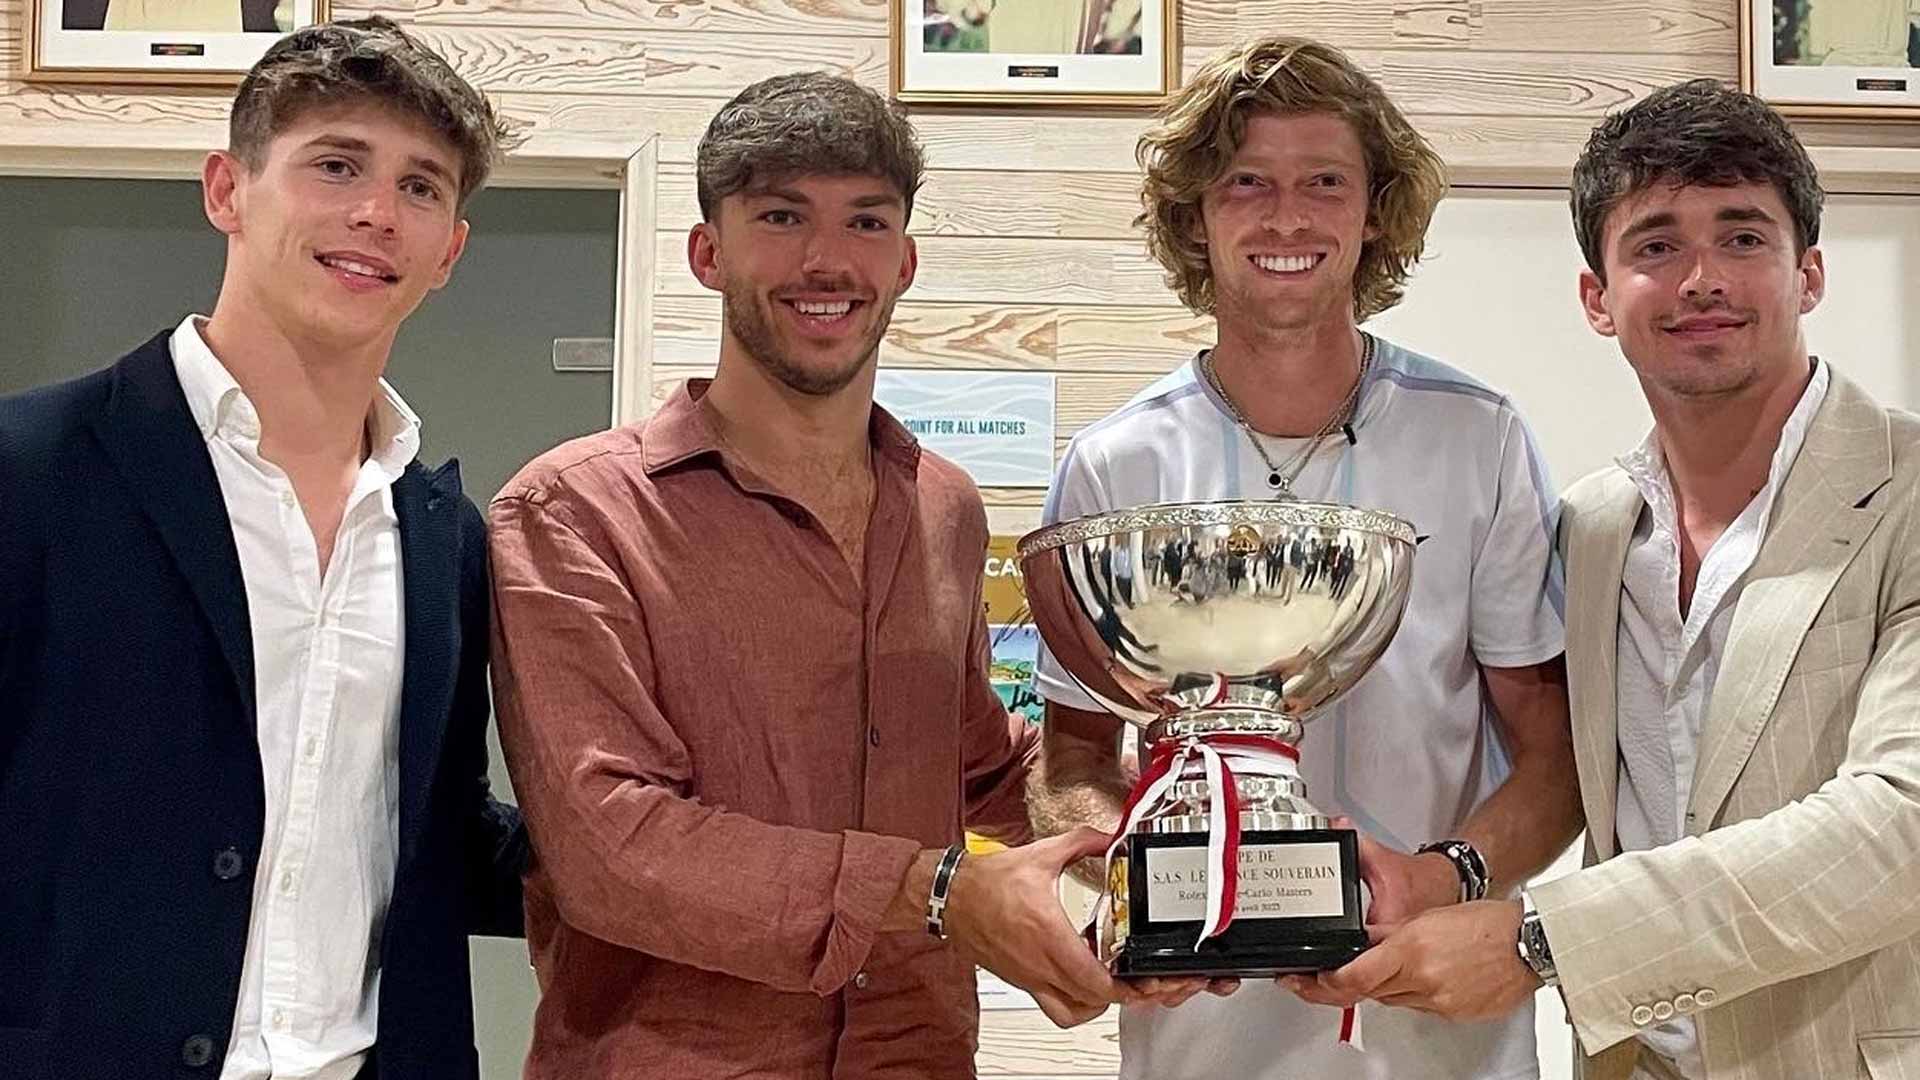 From left to right: Arthur Leclerc, Pierre Gasly, Andrey Rublev, and Charles Leclerc.